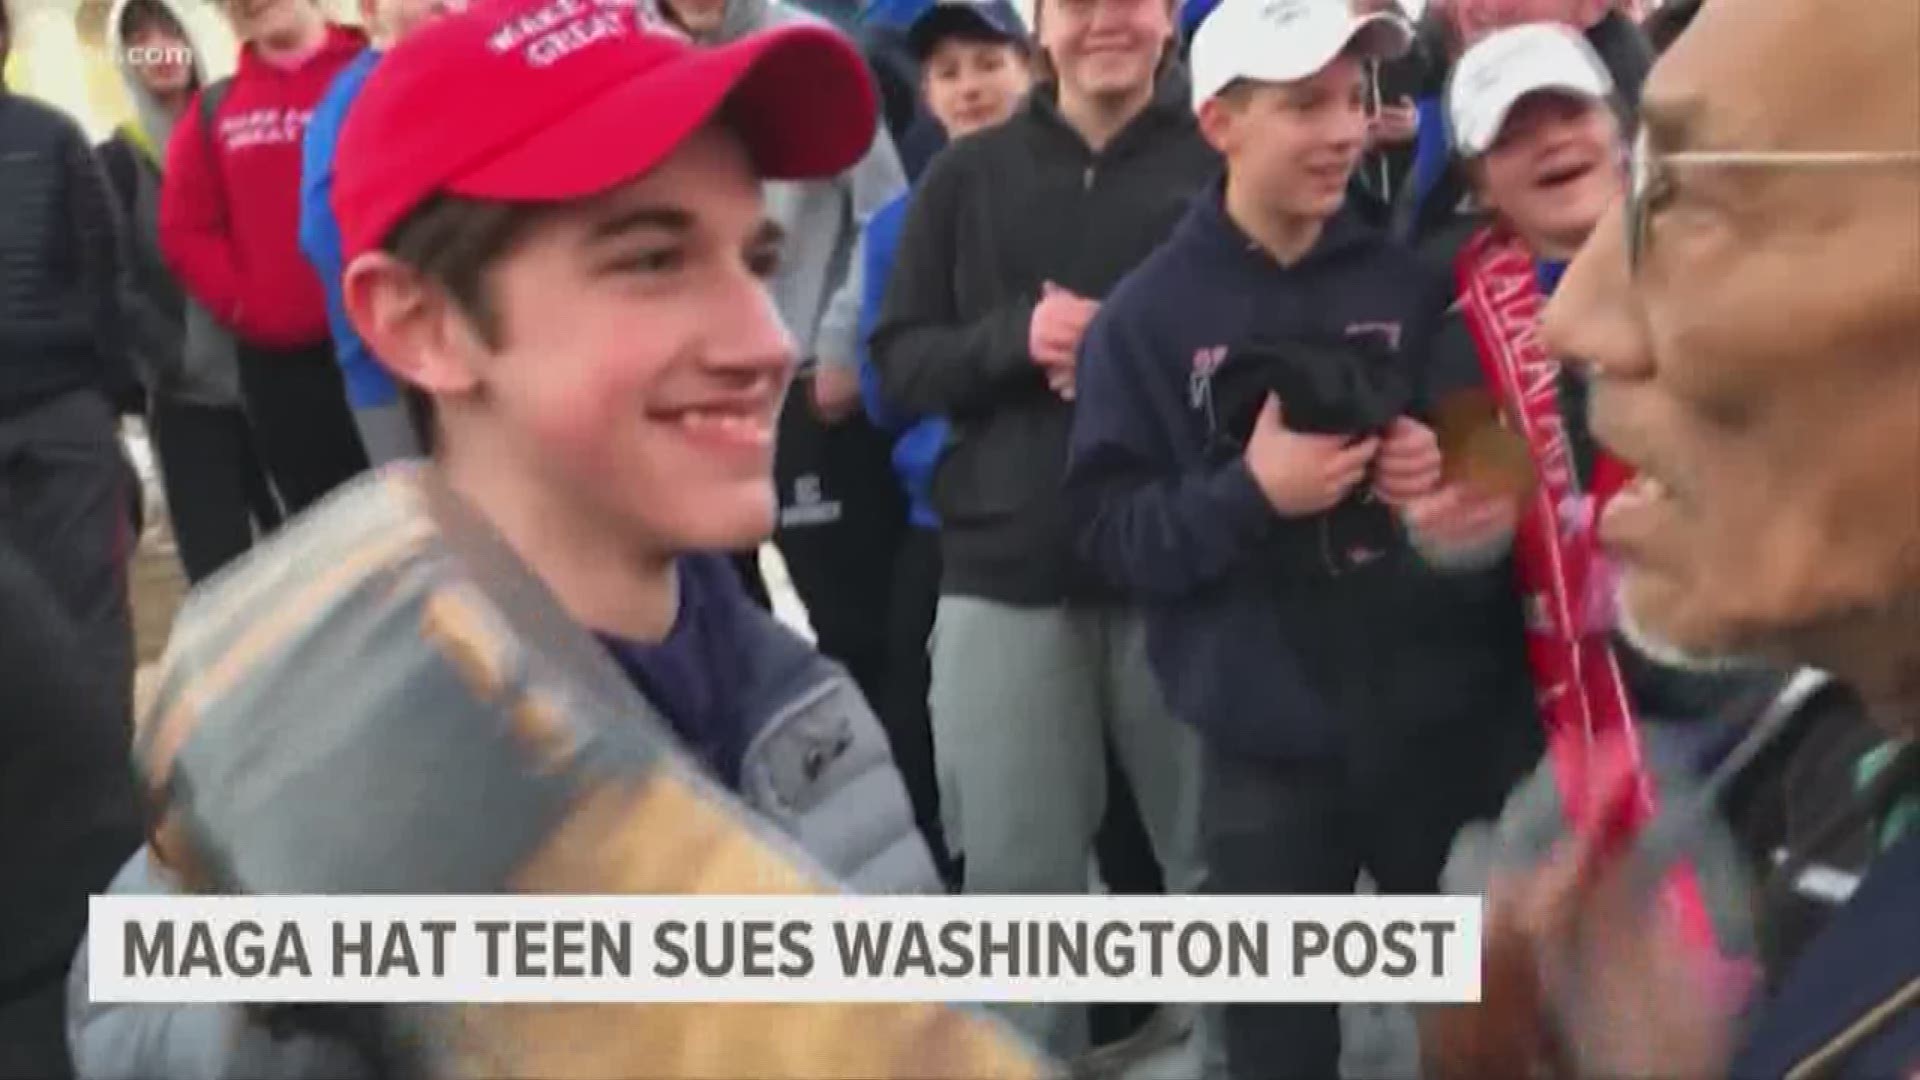 A week after a Kentucky diocese found that Catholic school boys didn’t instigate a confrontation at the Lincoln Memorial that went viral on social media, a student has filed a lawsuit against the Washington Post.